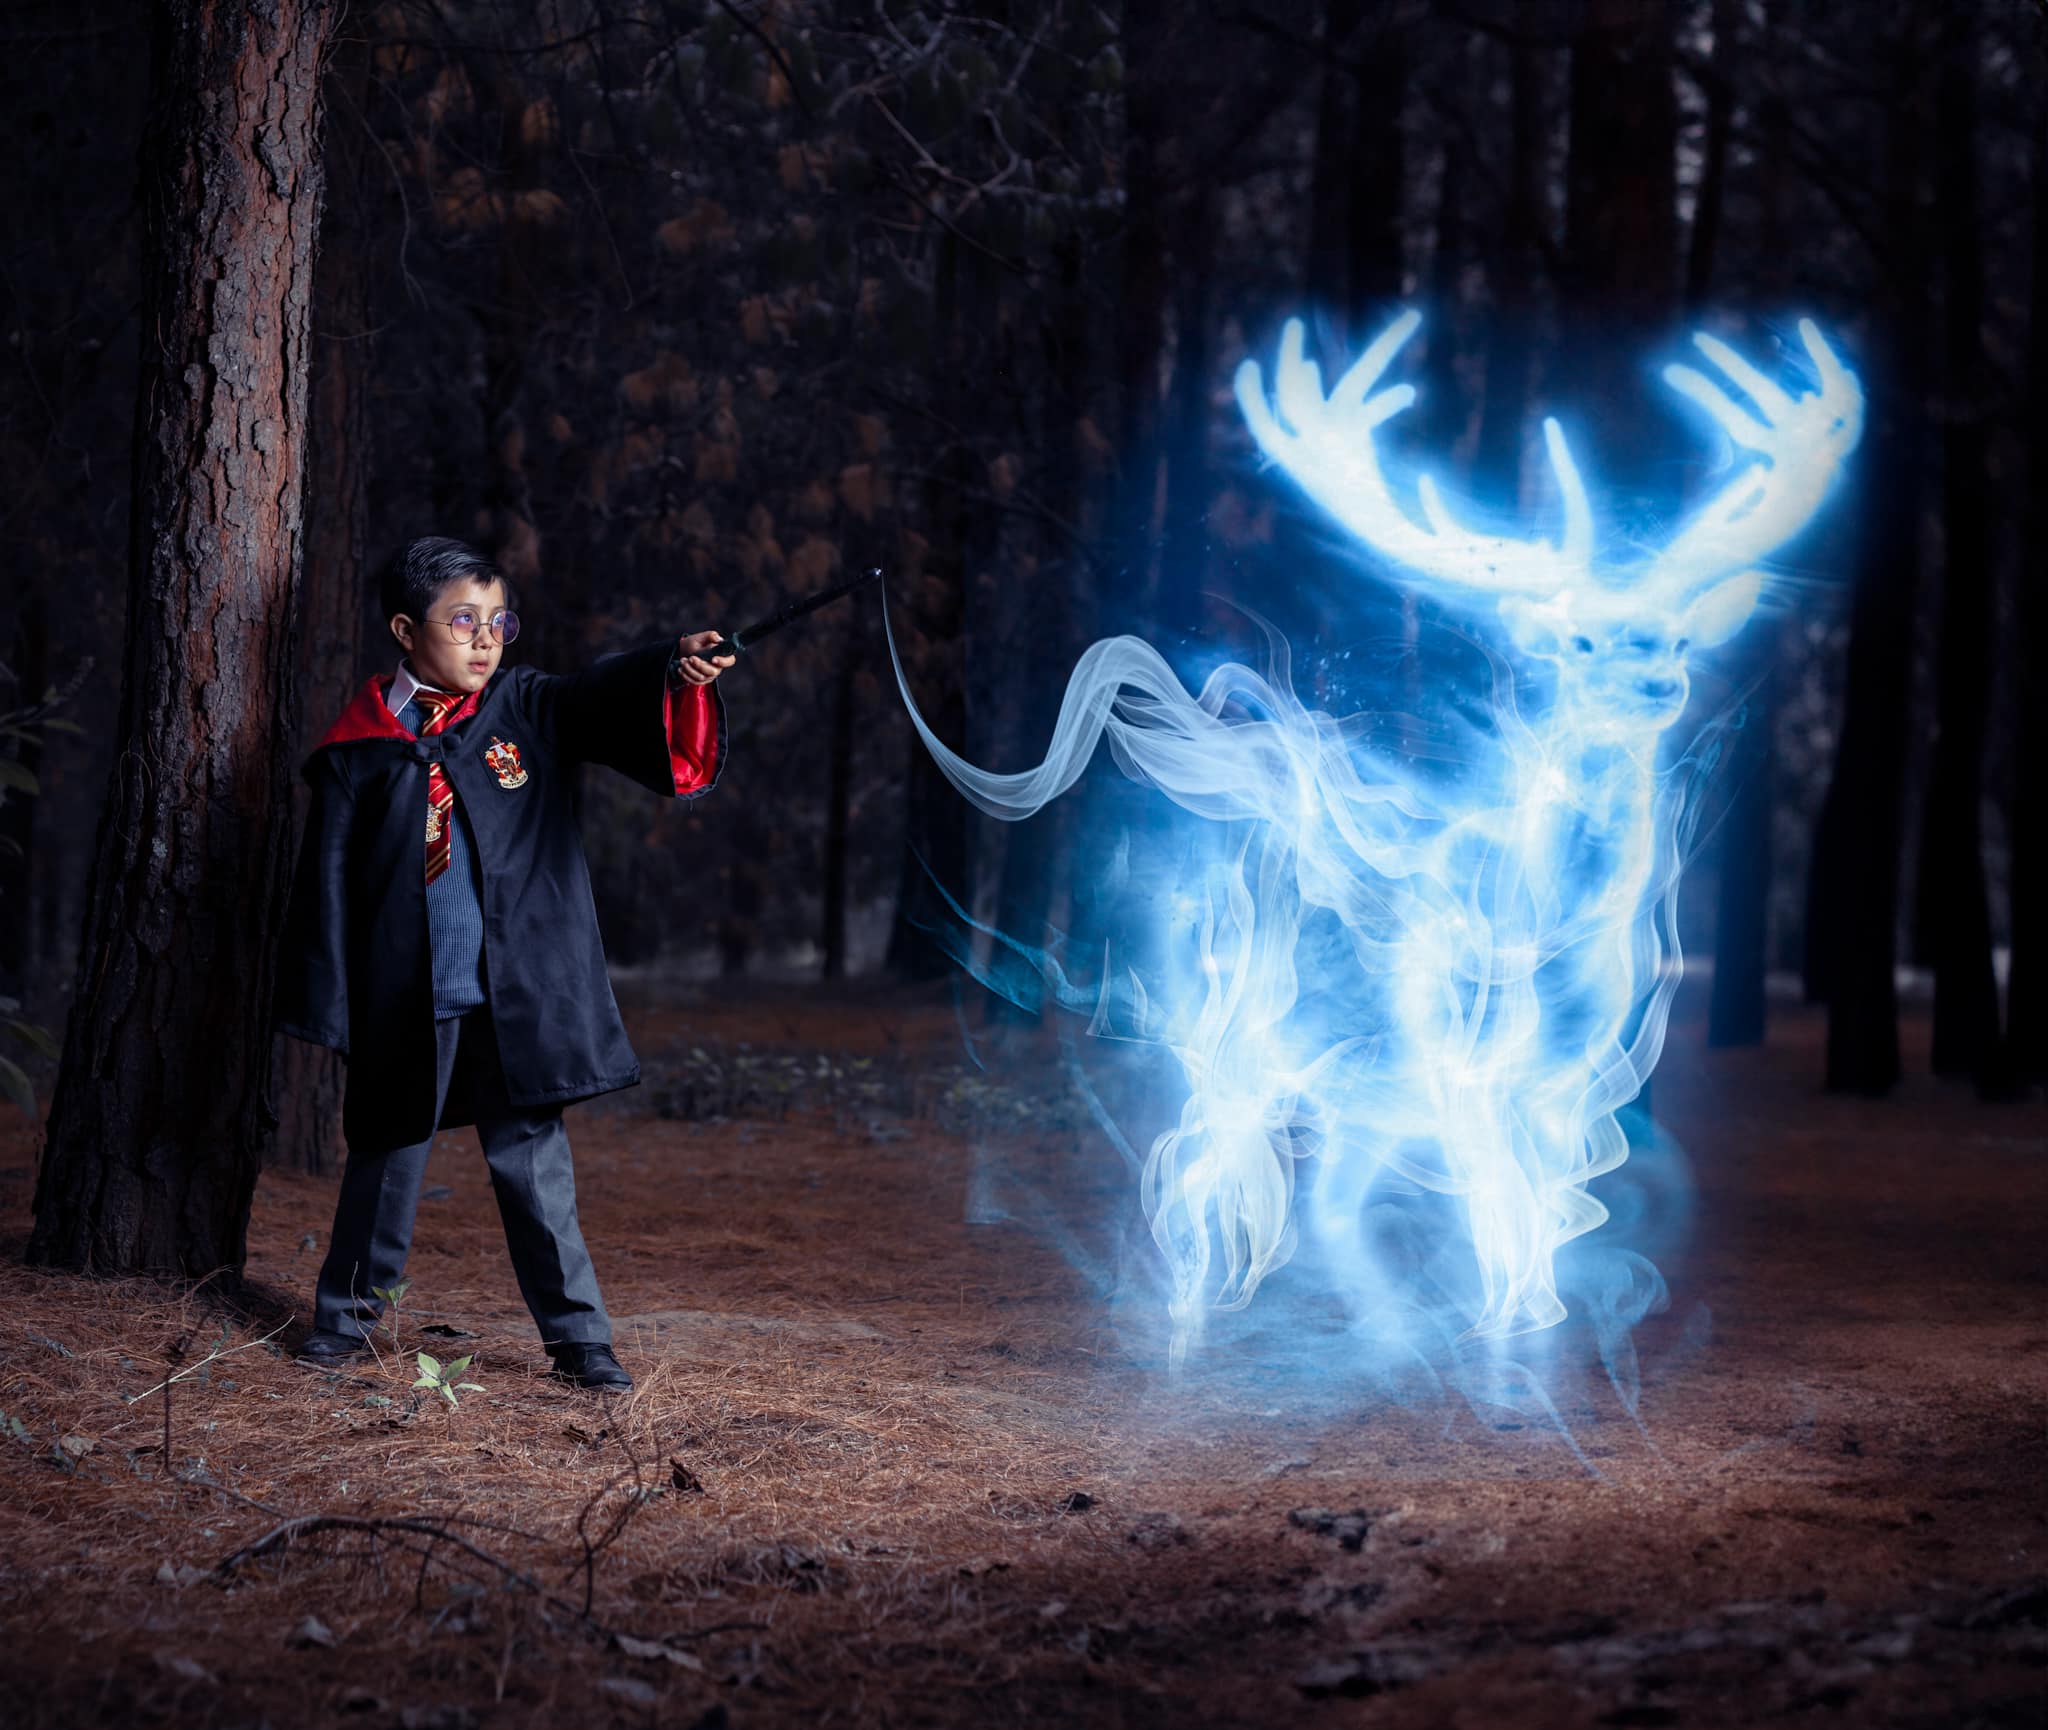 Creating Magical Harry Potter Themed Photoshoots: A Step-by-Step Guide with Photoshop Editing Tips